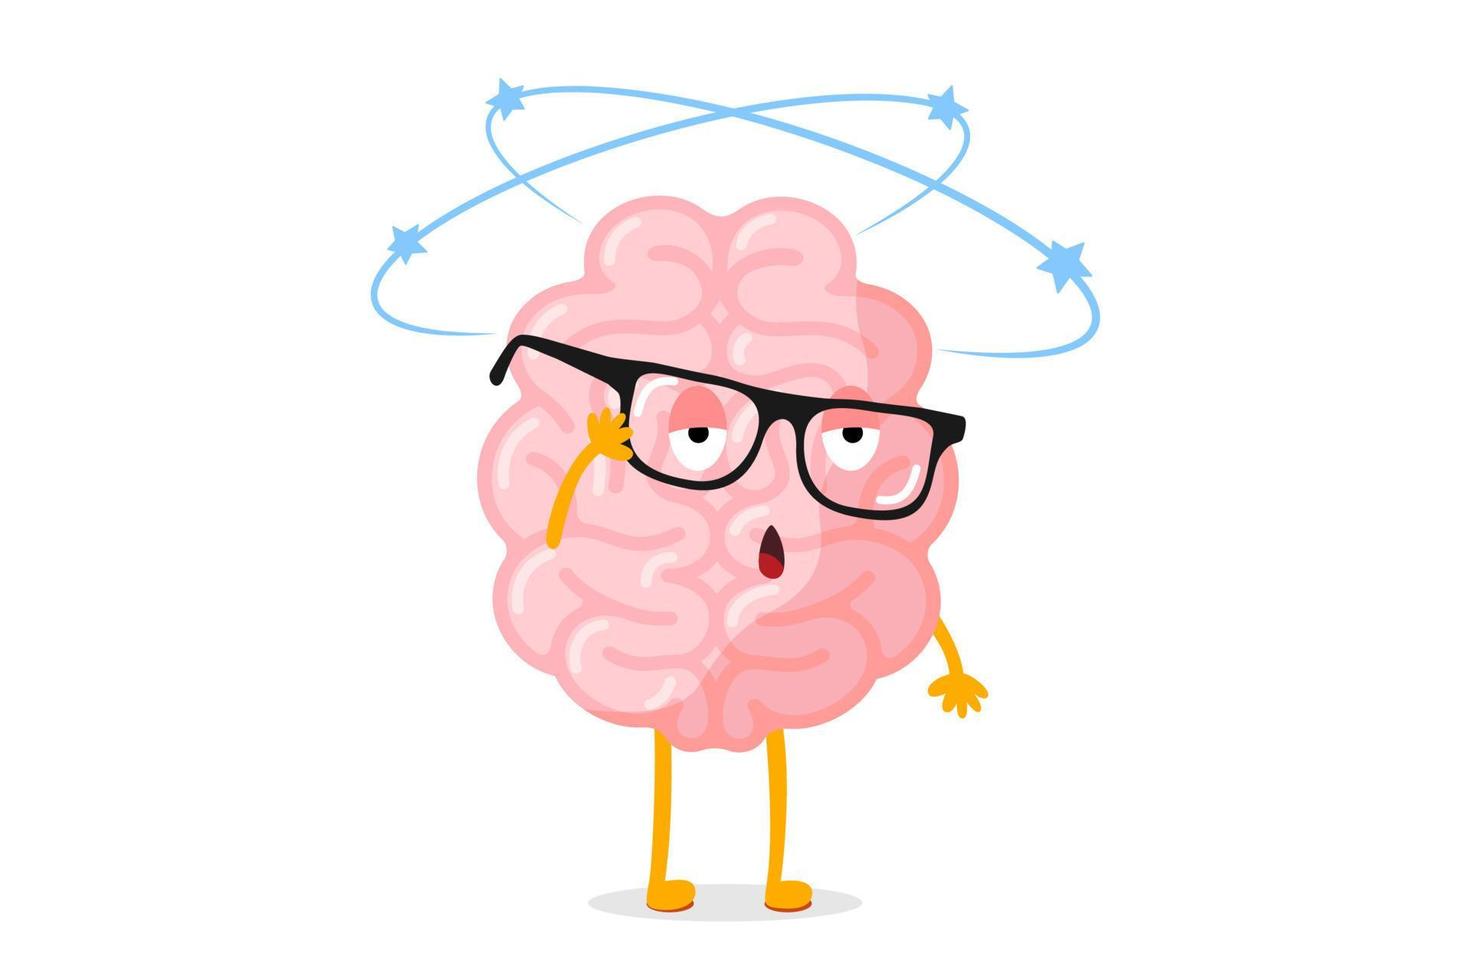 Cartoon sick human brain fainted dizzy. Central nervous system mascot with glasses dizziness. Human mind organ character feeling unwell and headache. Vector eps illustration